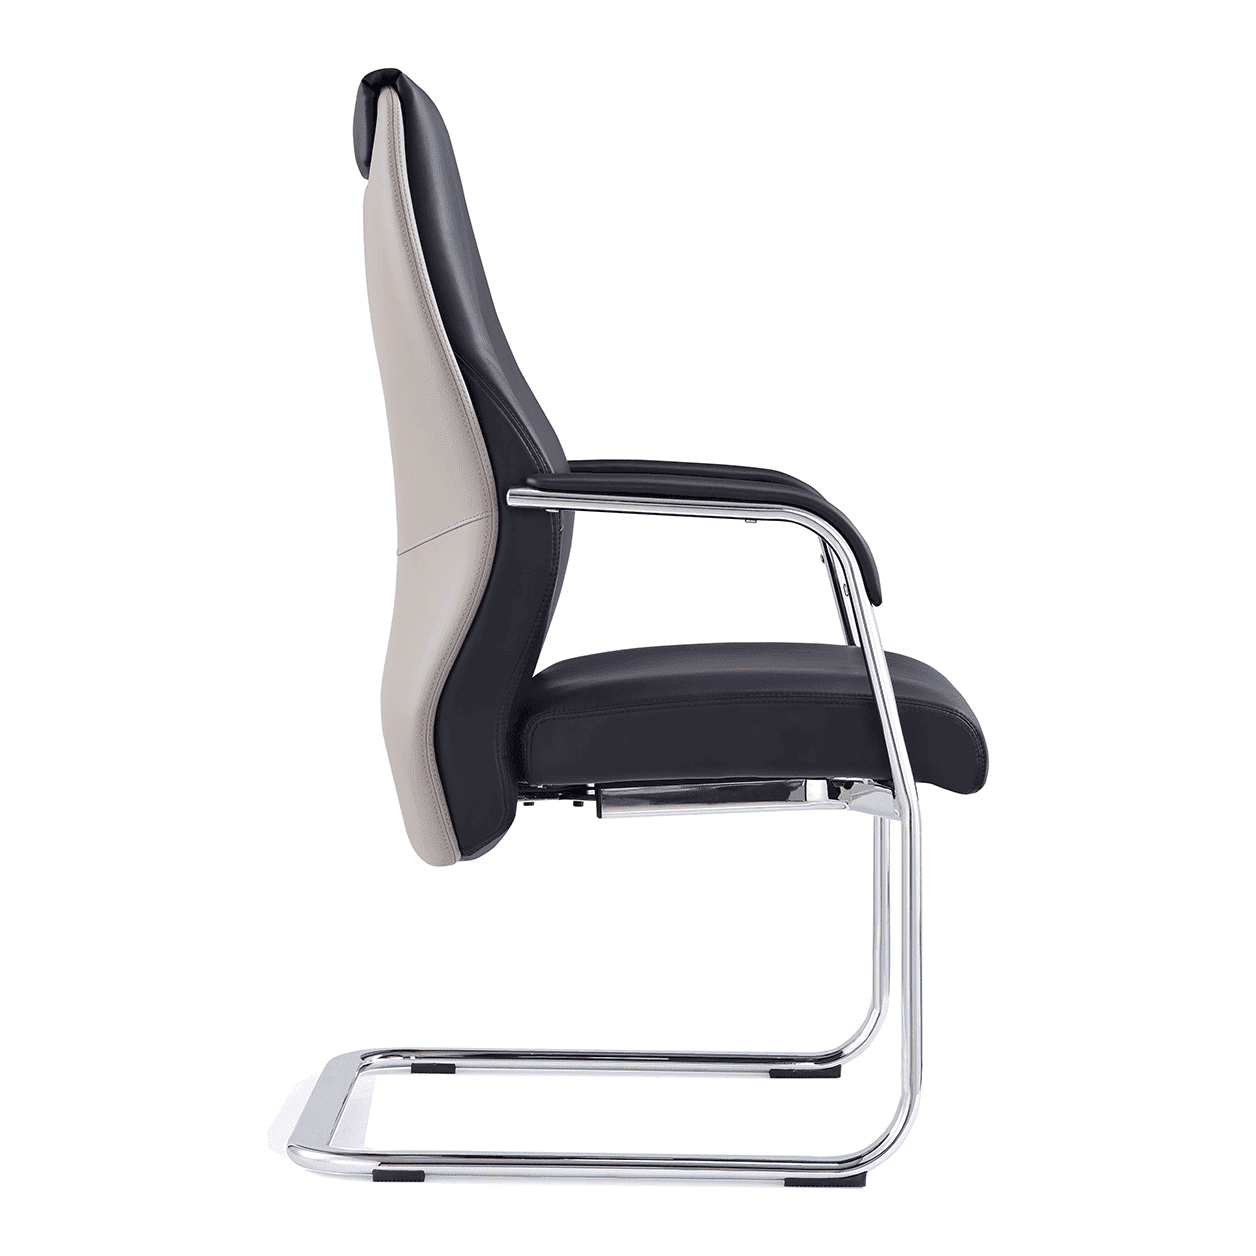 Mien High Back Leather Cantilever Office Chair - Visitor, Chrome Frame, 110kg Capacity, 8hr Use, 5yr Warranty - Flat Packed